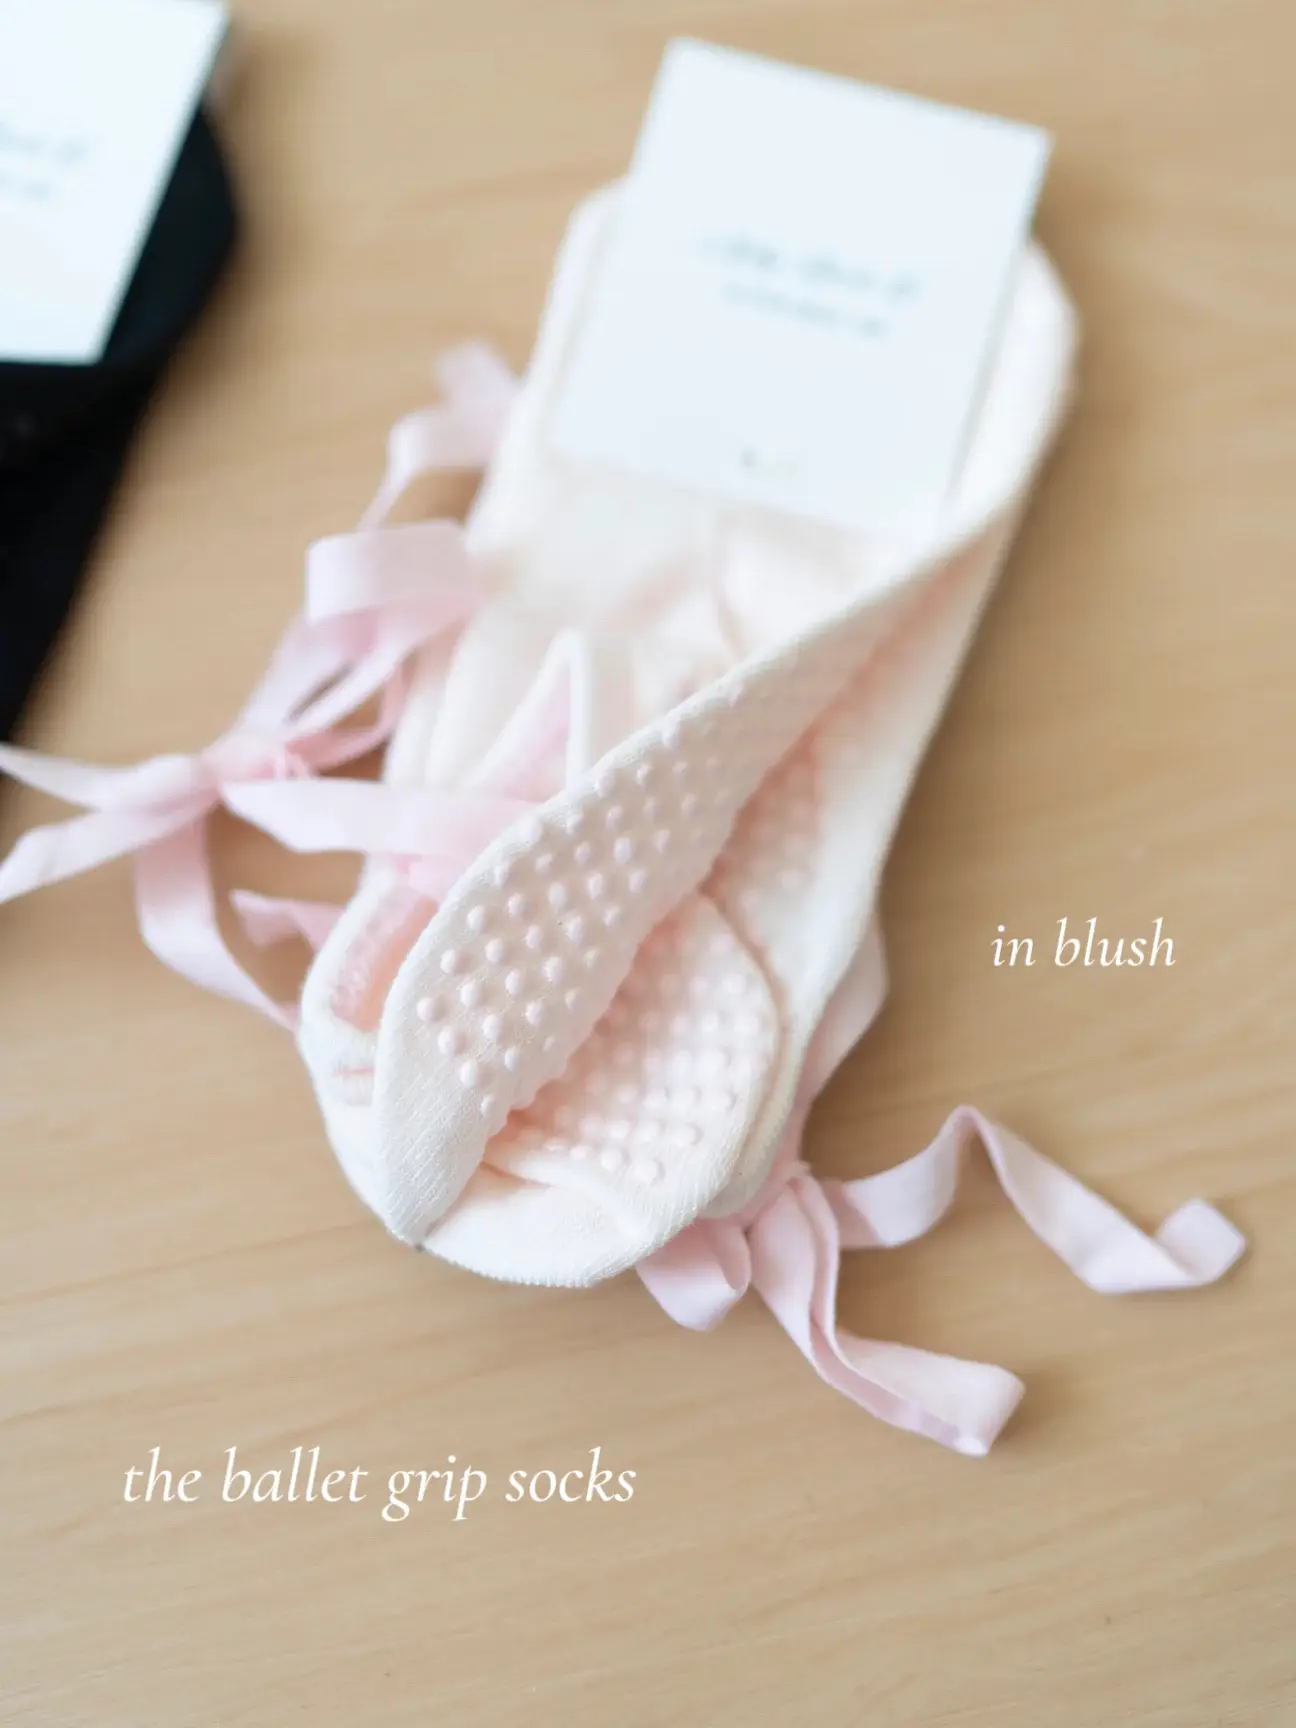 Pilates princess essentials: grip socks 🩰🎀, Gallery posted by gisele  rei!